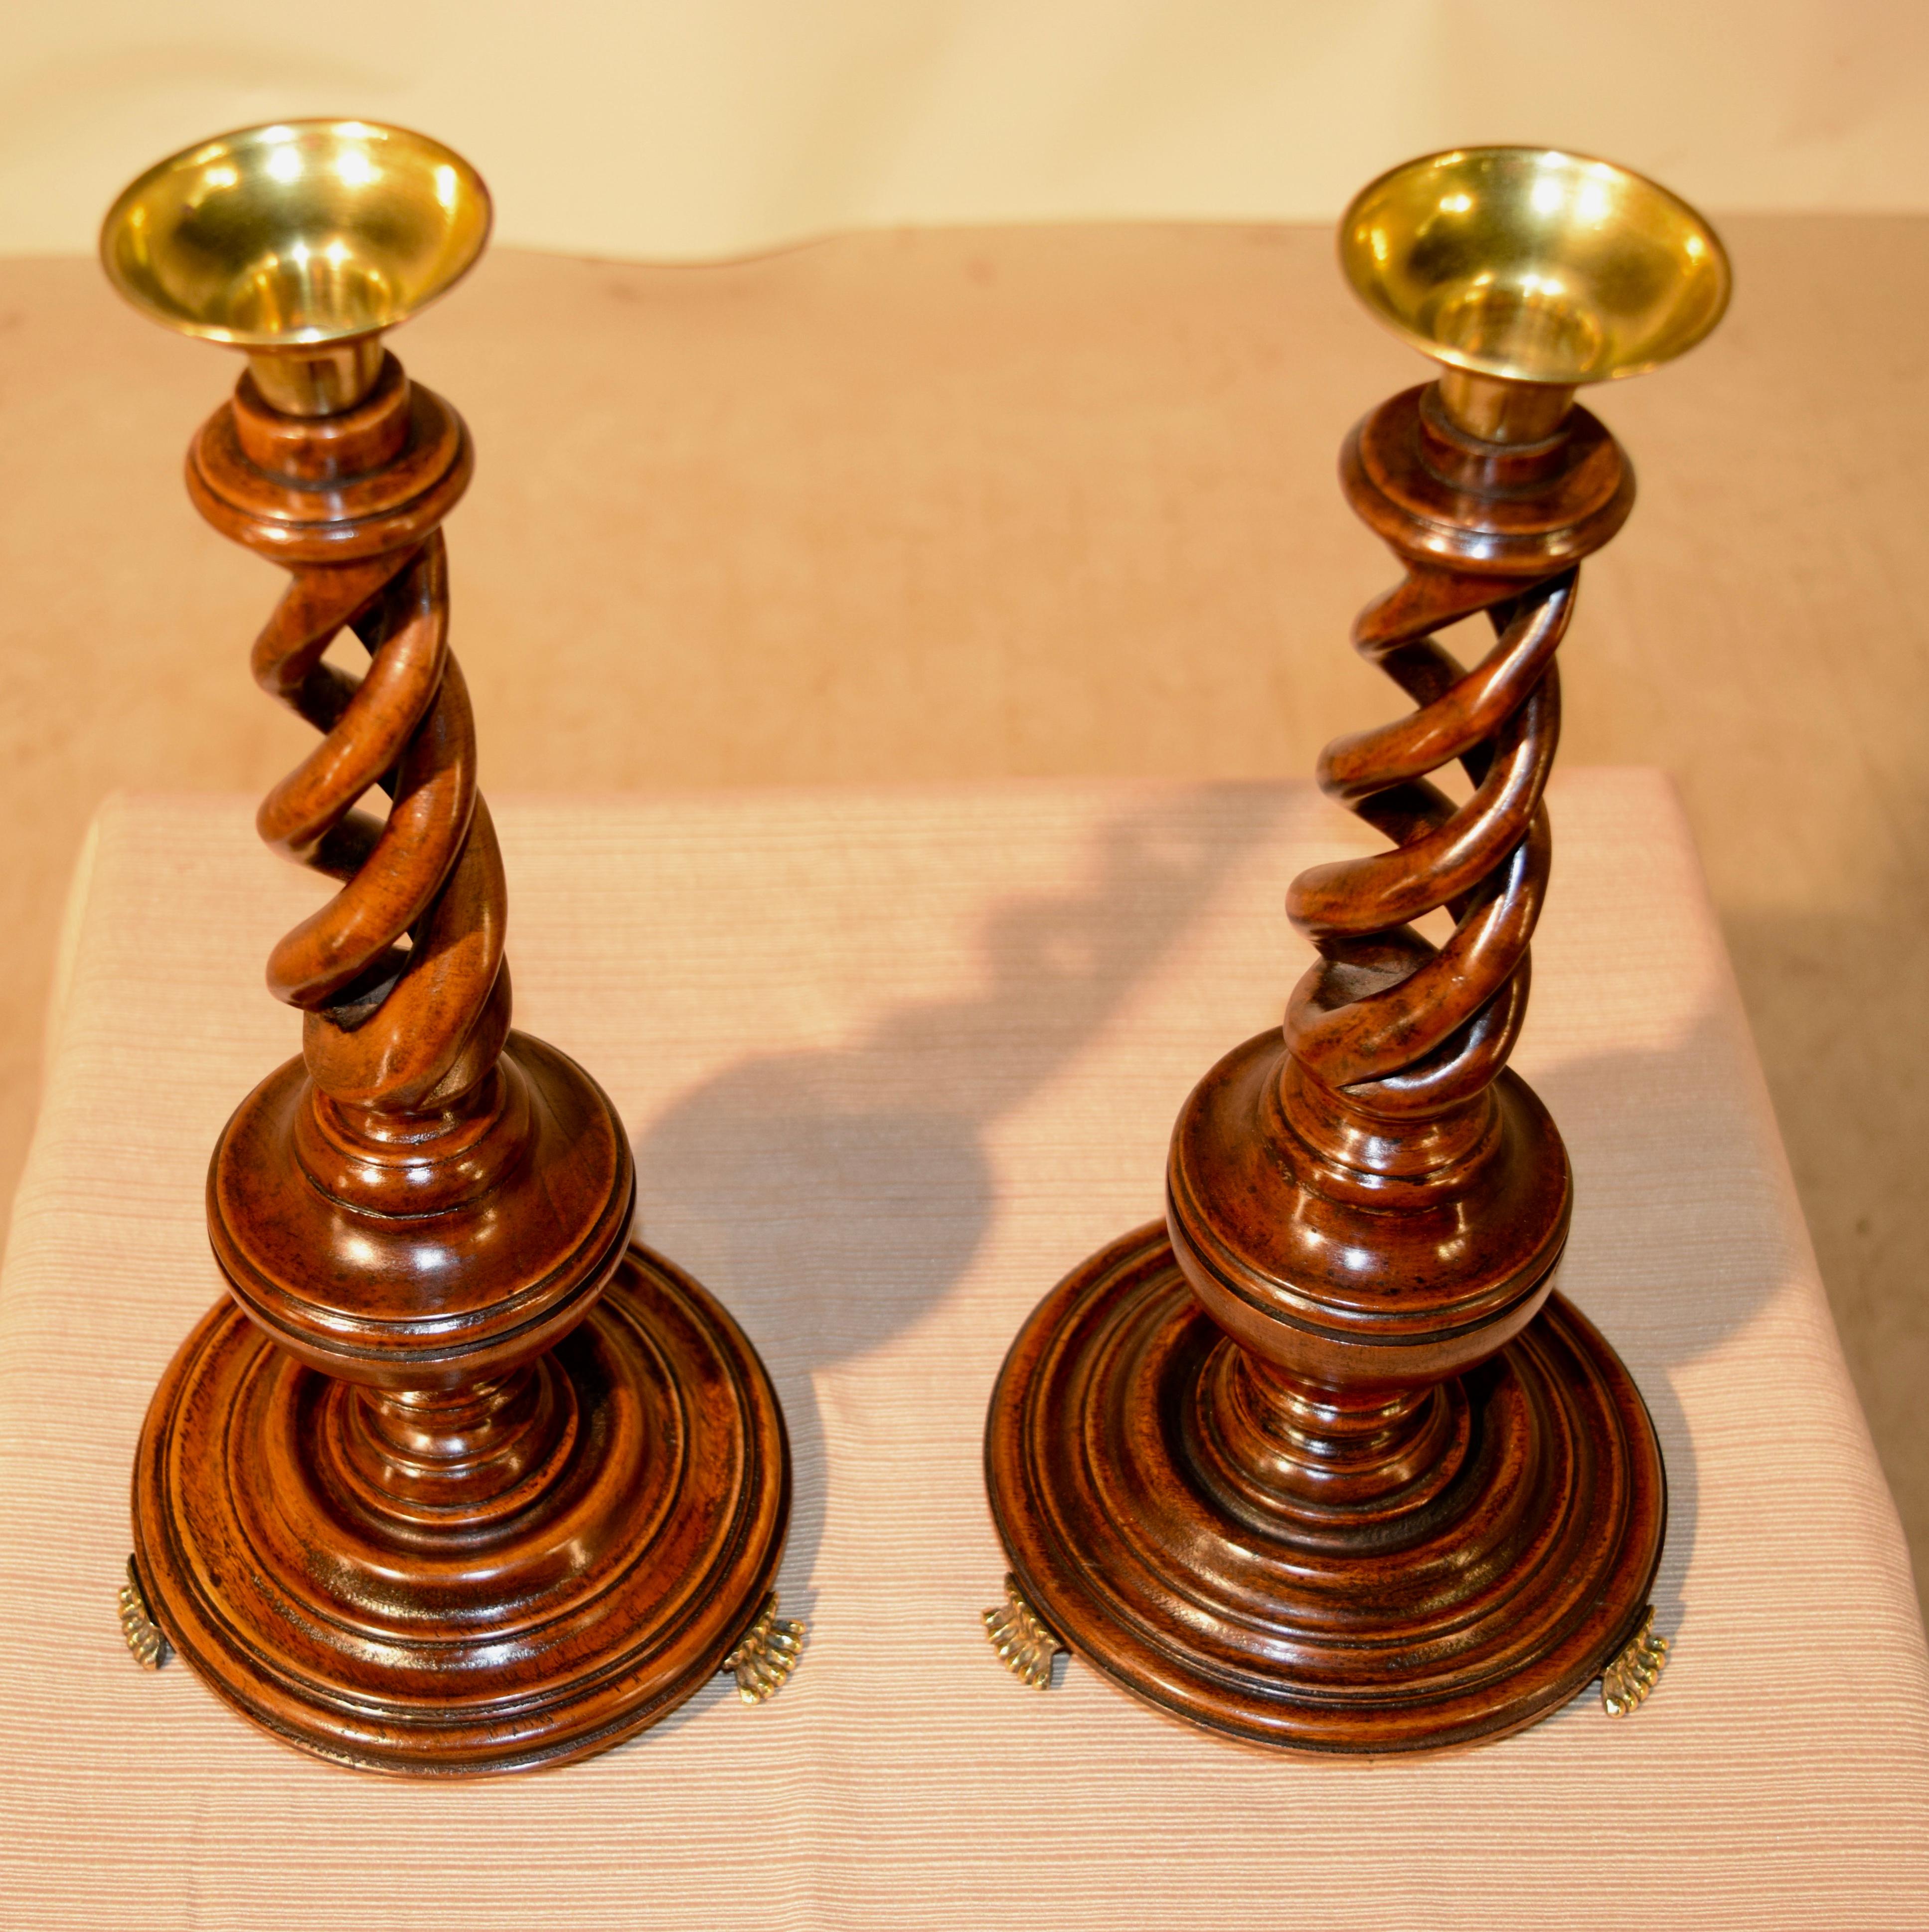 Pair of open triple twist mahogany candlesticks from England, circa 1900. The brass candle cups follow down to exquisitely hand turned open triple twist stems over hand turned bulbous turnings with lovely hand turned bases, supported upon hand cast